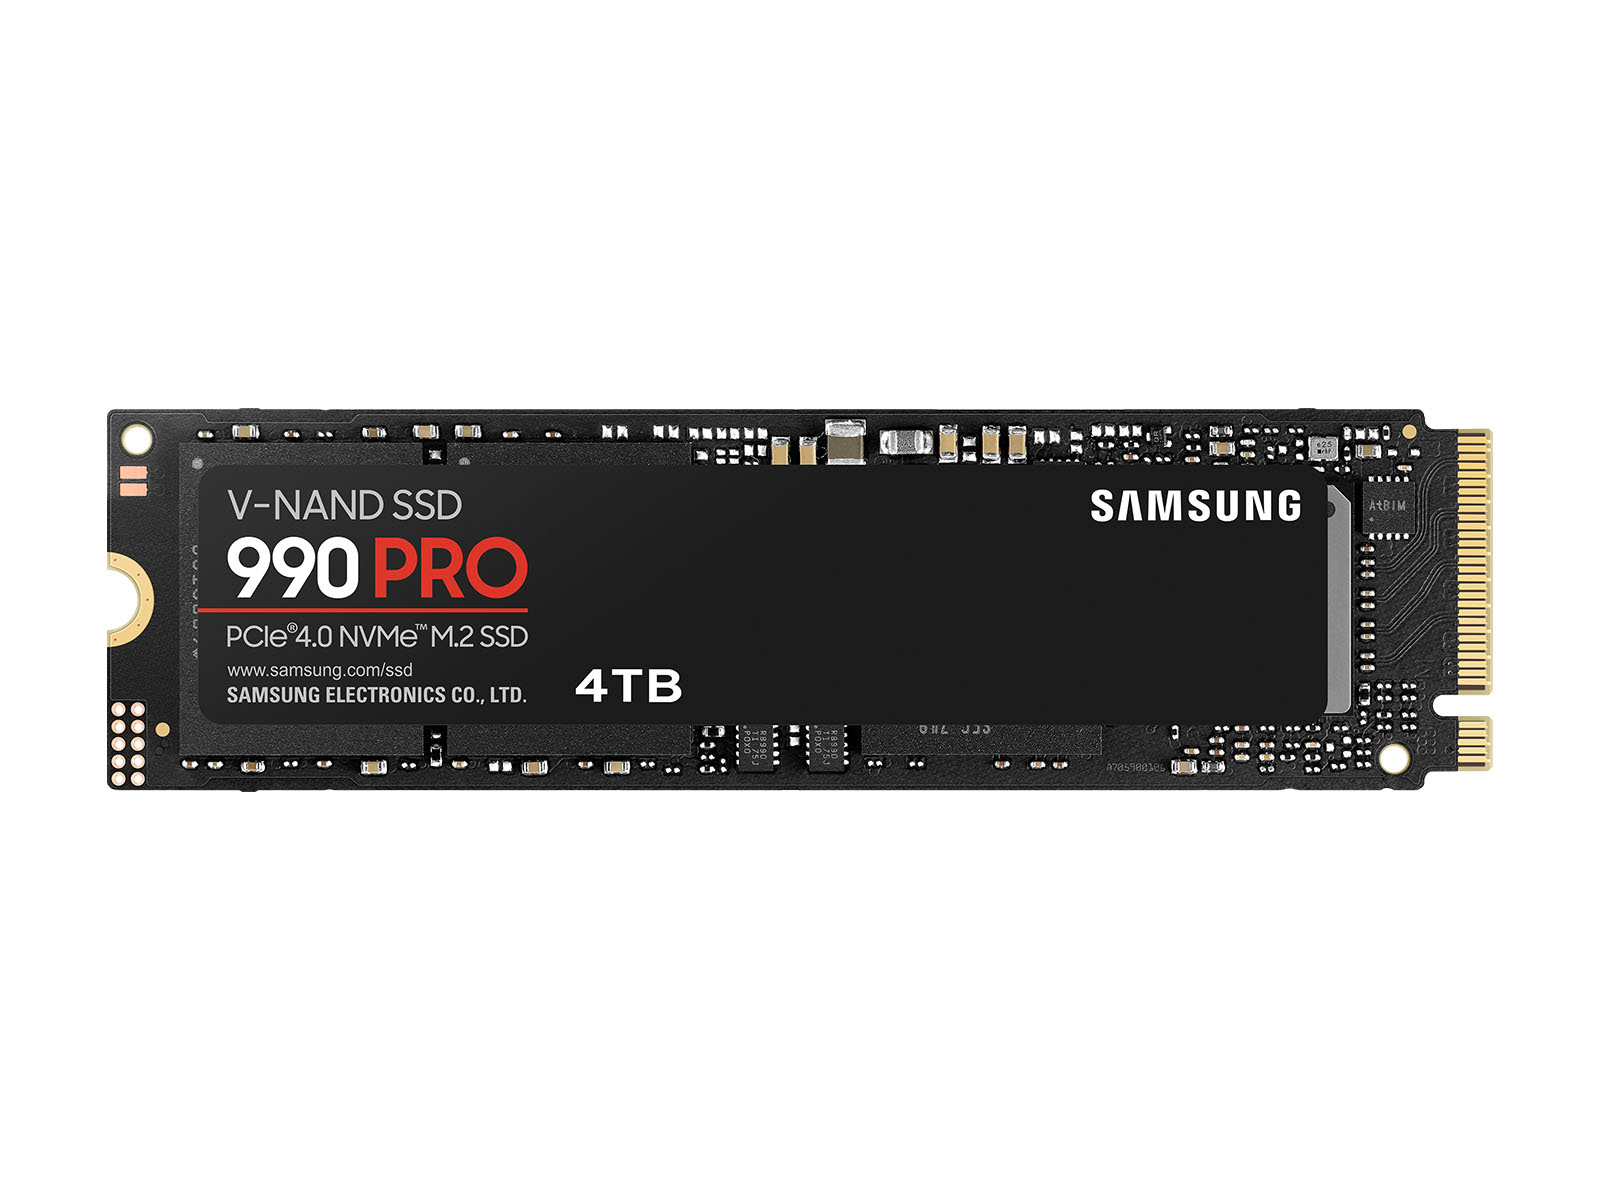 Samsung 990 PRO PCIe® 4.0 NVMe™ SSD 4TB $223.99 for EPP at Samsung